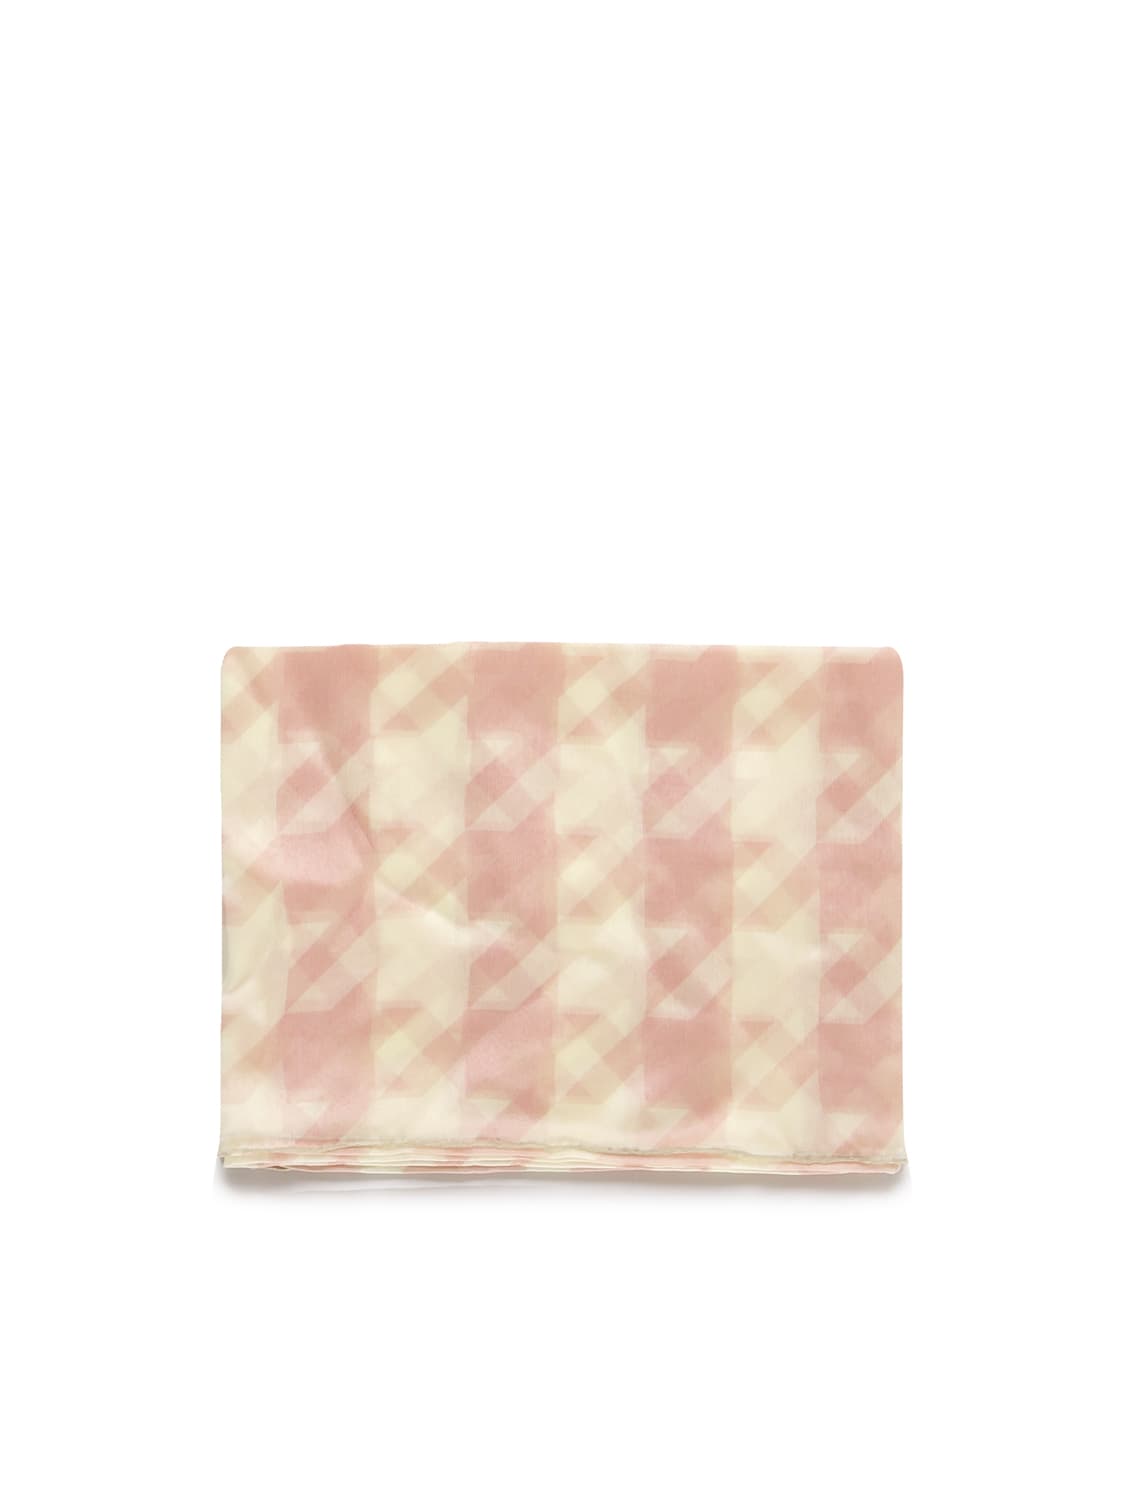 BURBERRY SILK SCARF WITH HOUNDSTOOTH PATTERN